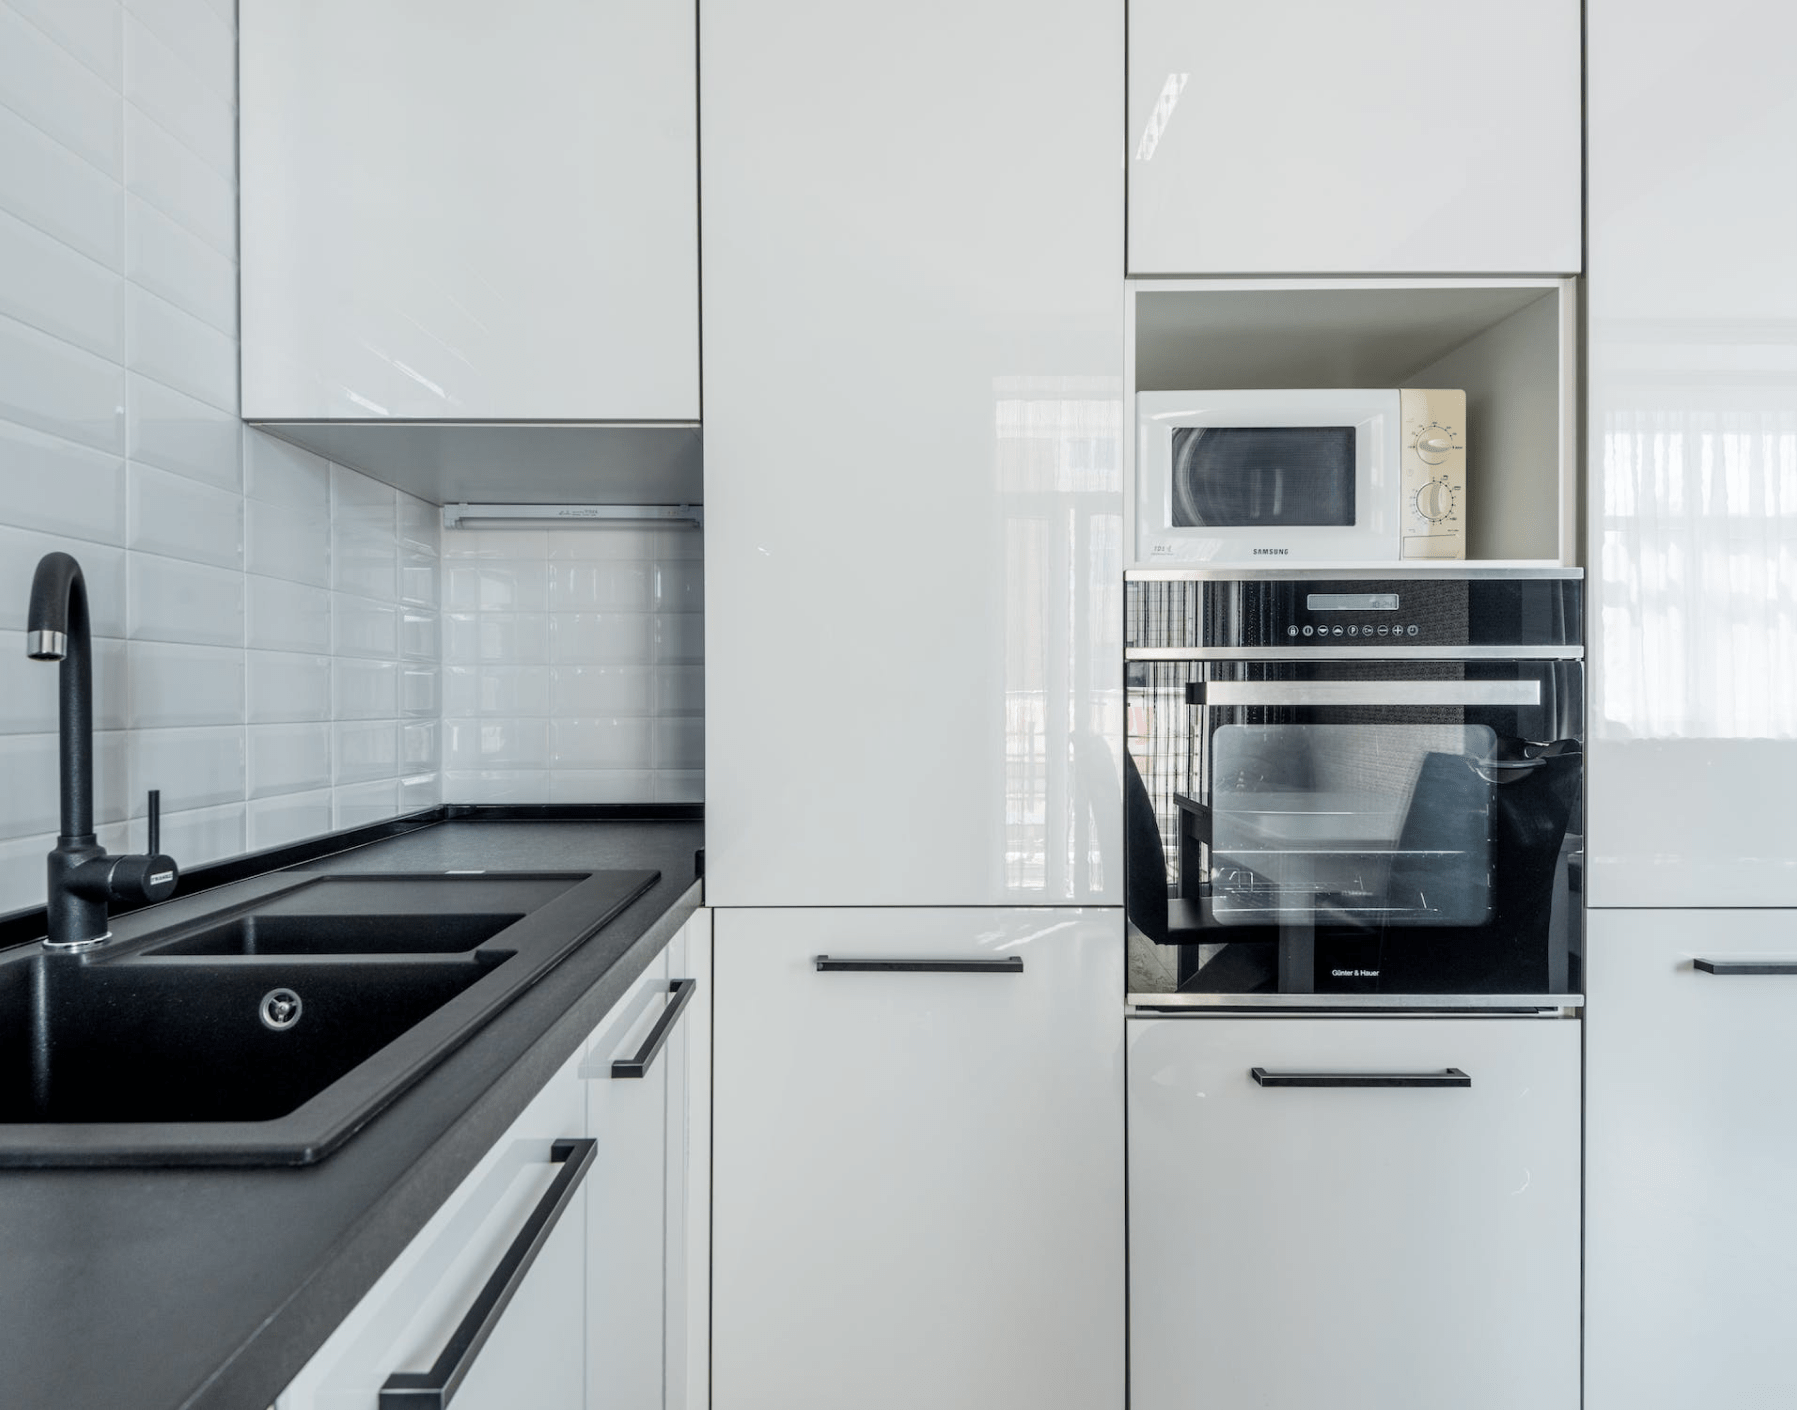 A Contemporary kitchen with white shiny cabinets and sleek black hardware